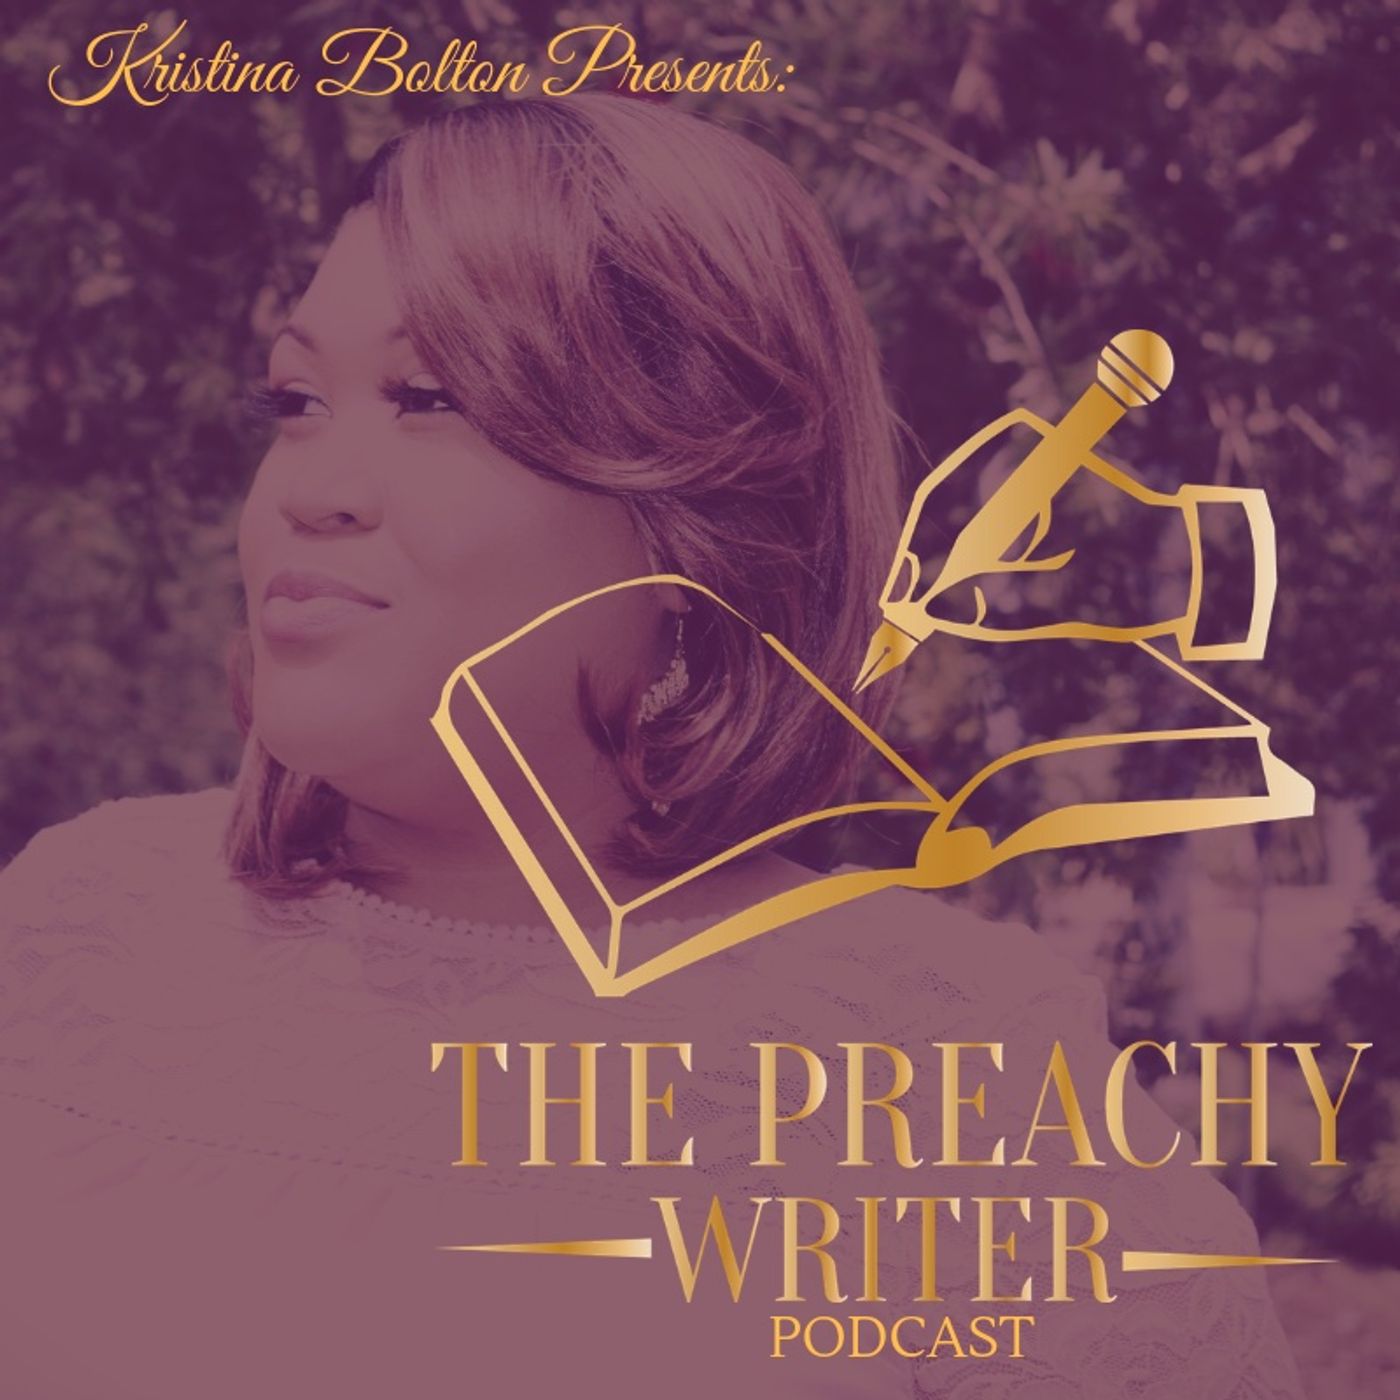 The Preachy Writer Podcast